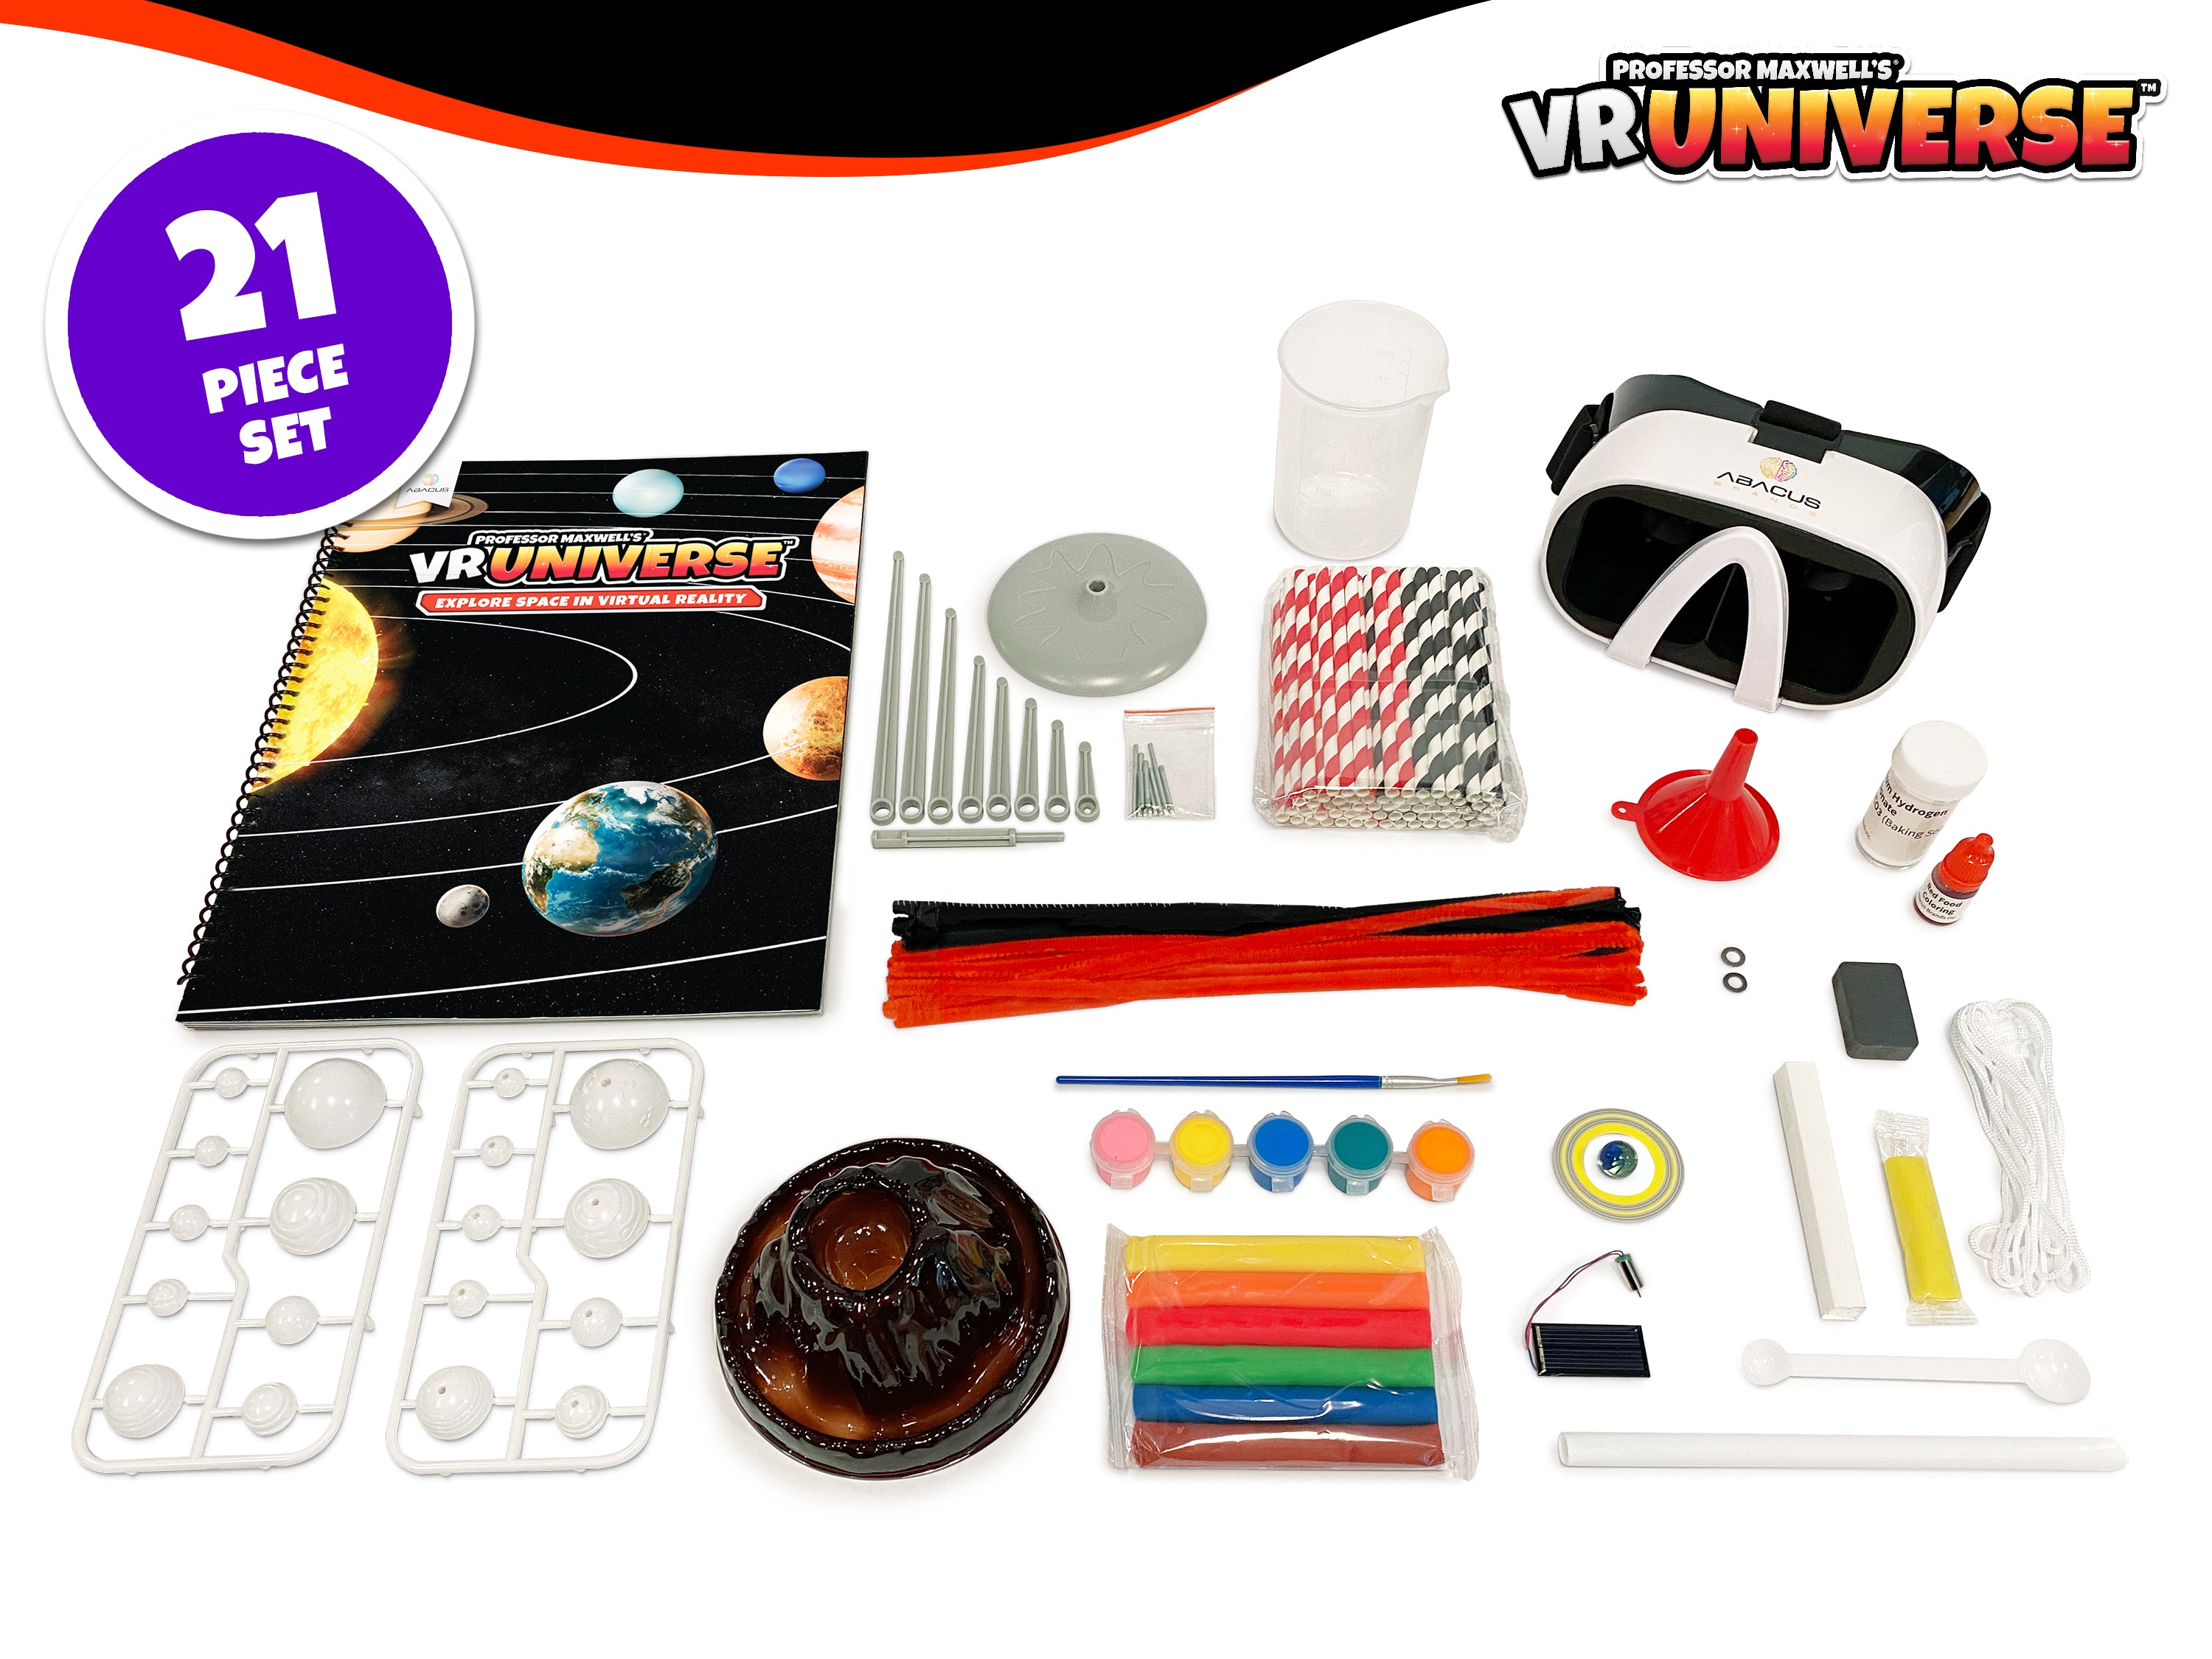 Professor Maxwell's Virtual Reality Space Science Kit for Kids - VR Universe | Educational Toys STEM Kit